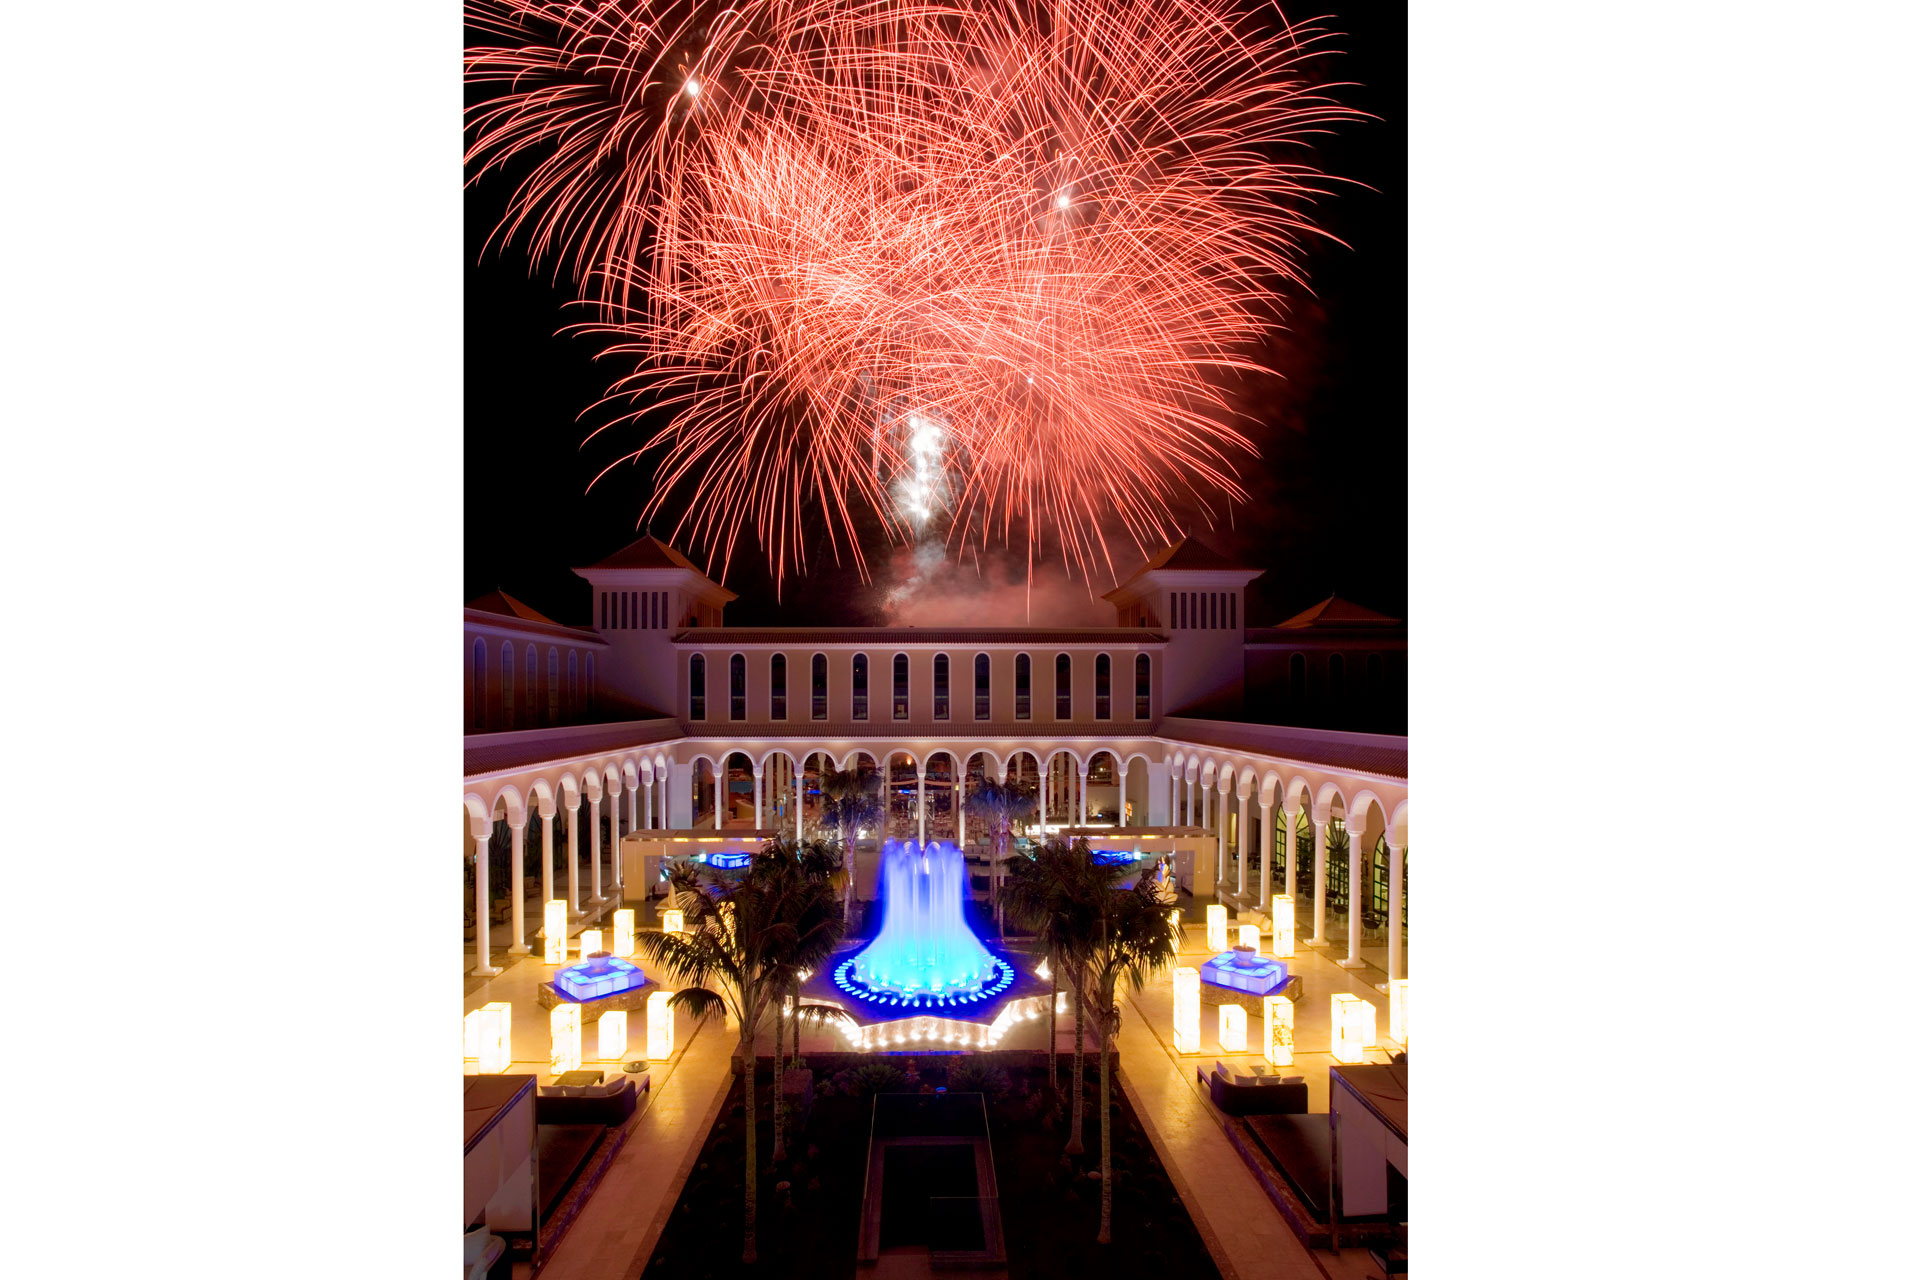 Bright amber coloured fireworks in night sky above hotel